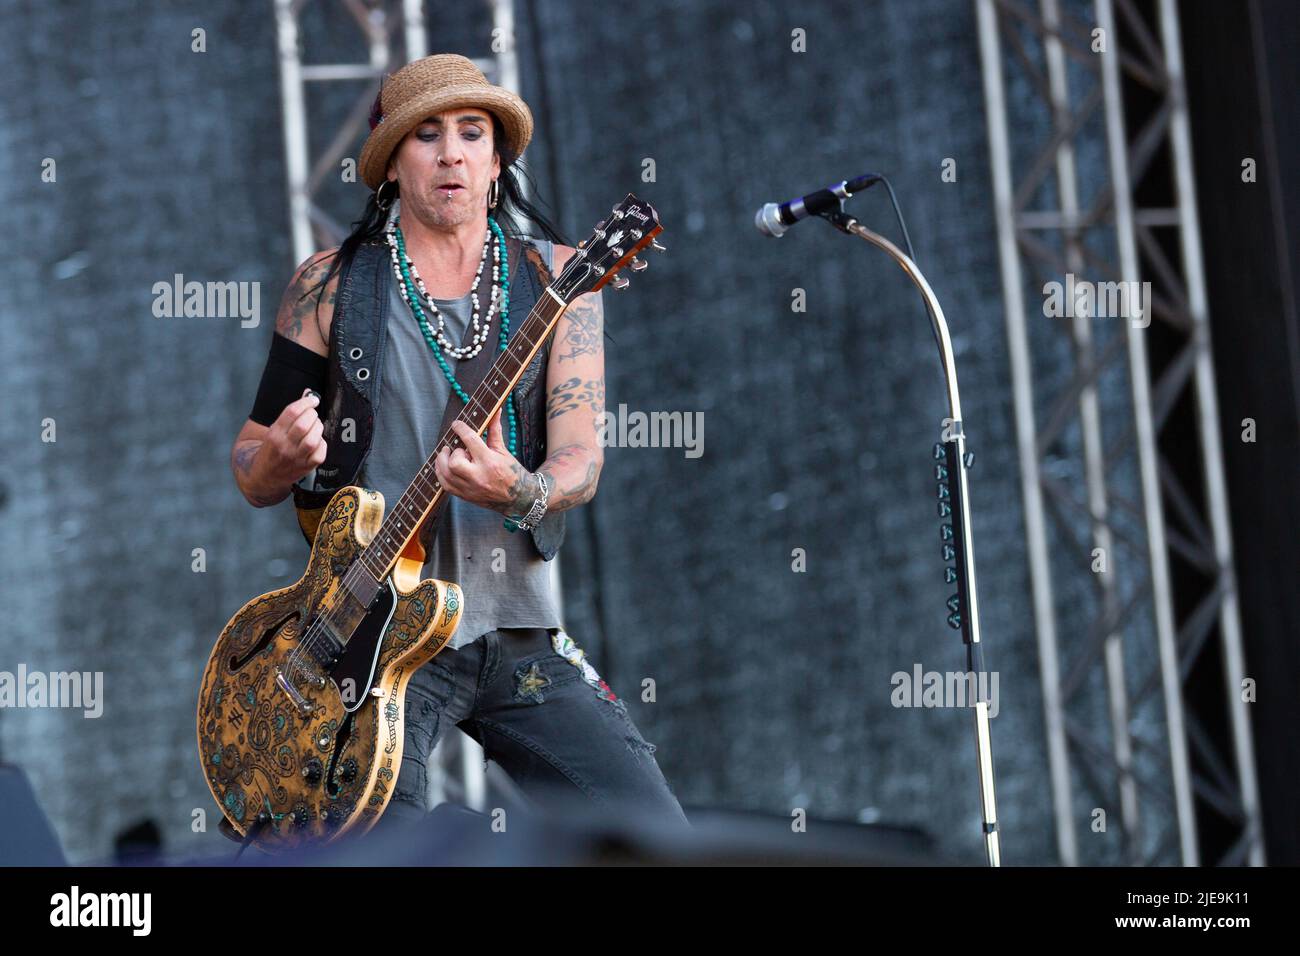 Oslo, Norway. 24th, June 2022. The Swedish hard rock band The Hellacopters performs a live concert during the Norwegian music festival Tons of Rock 2022 in Oslo. Here guitarist Dregen is seen live on stage. (Photo credit: Gonzales Photo - Per-Otto). Stock Photo